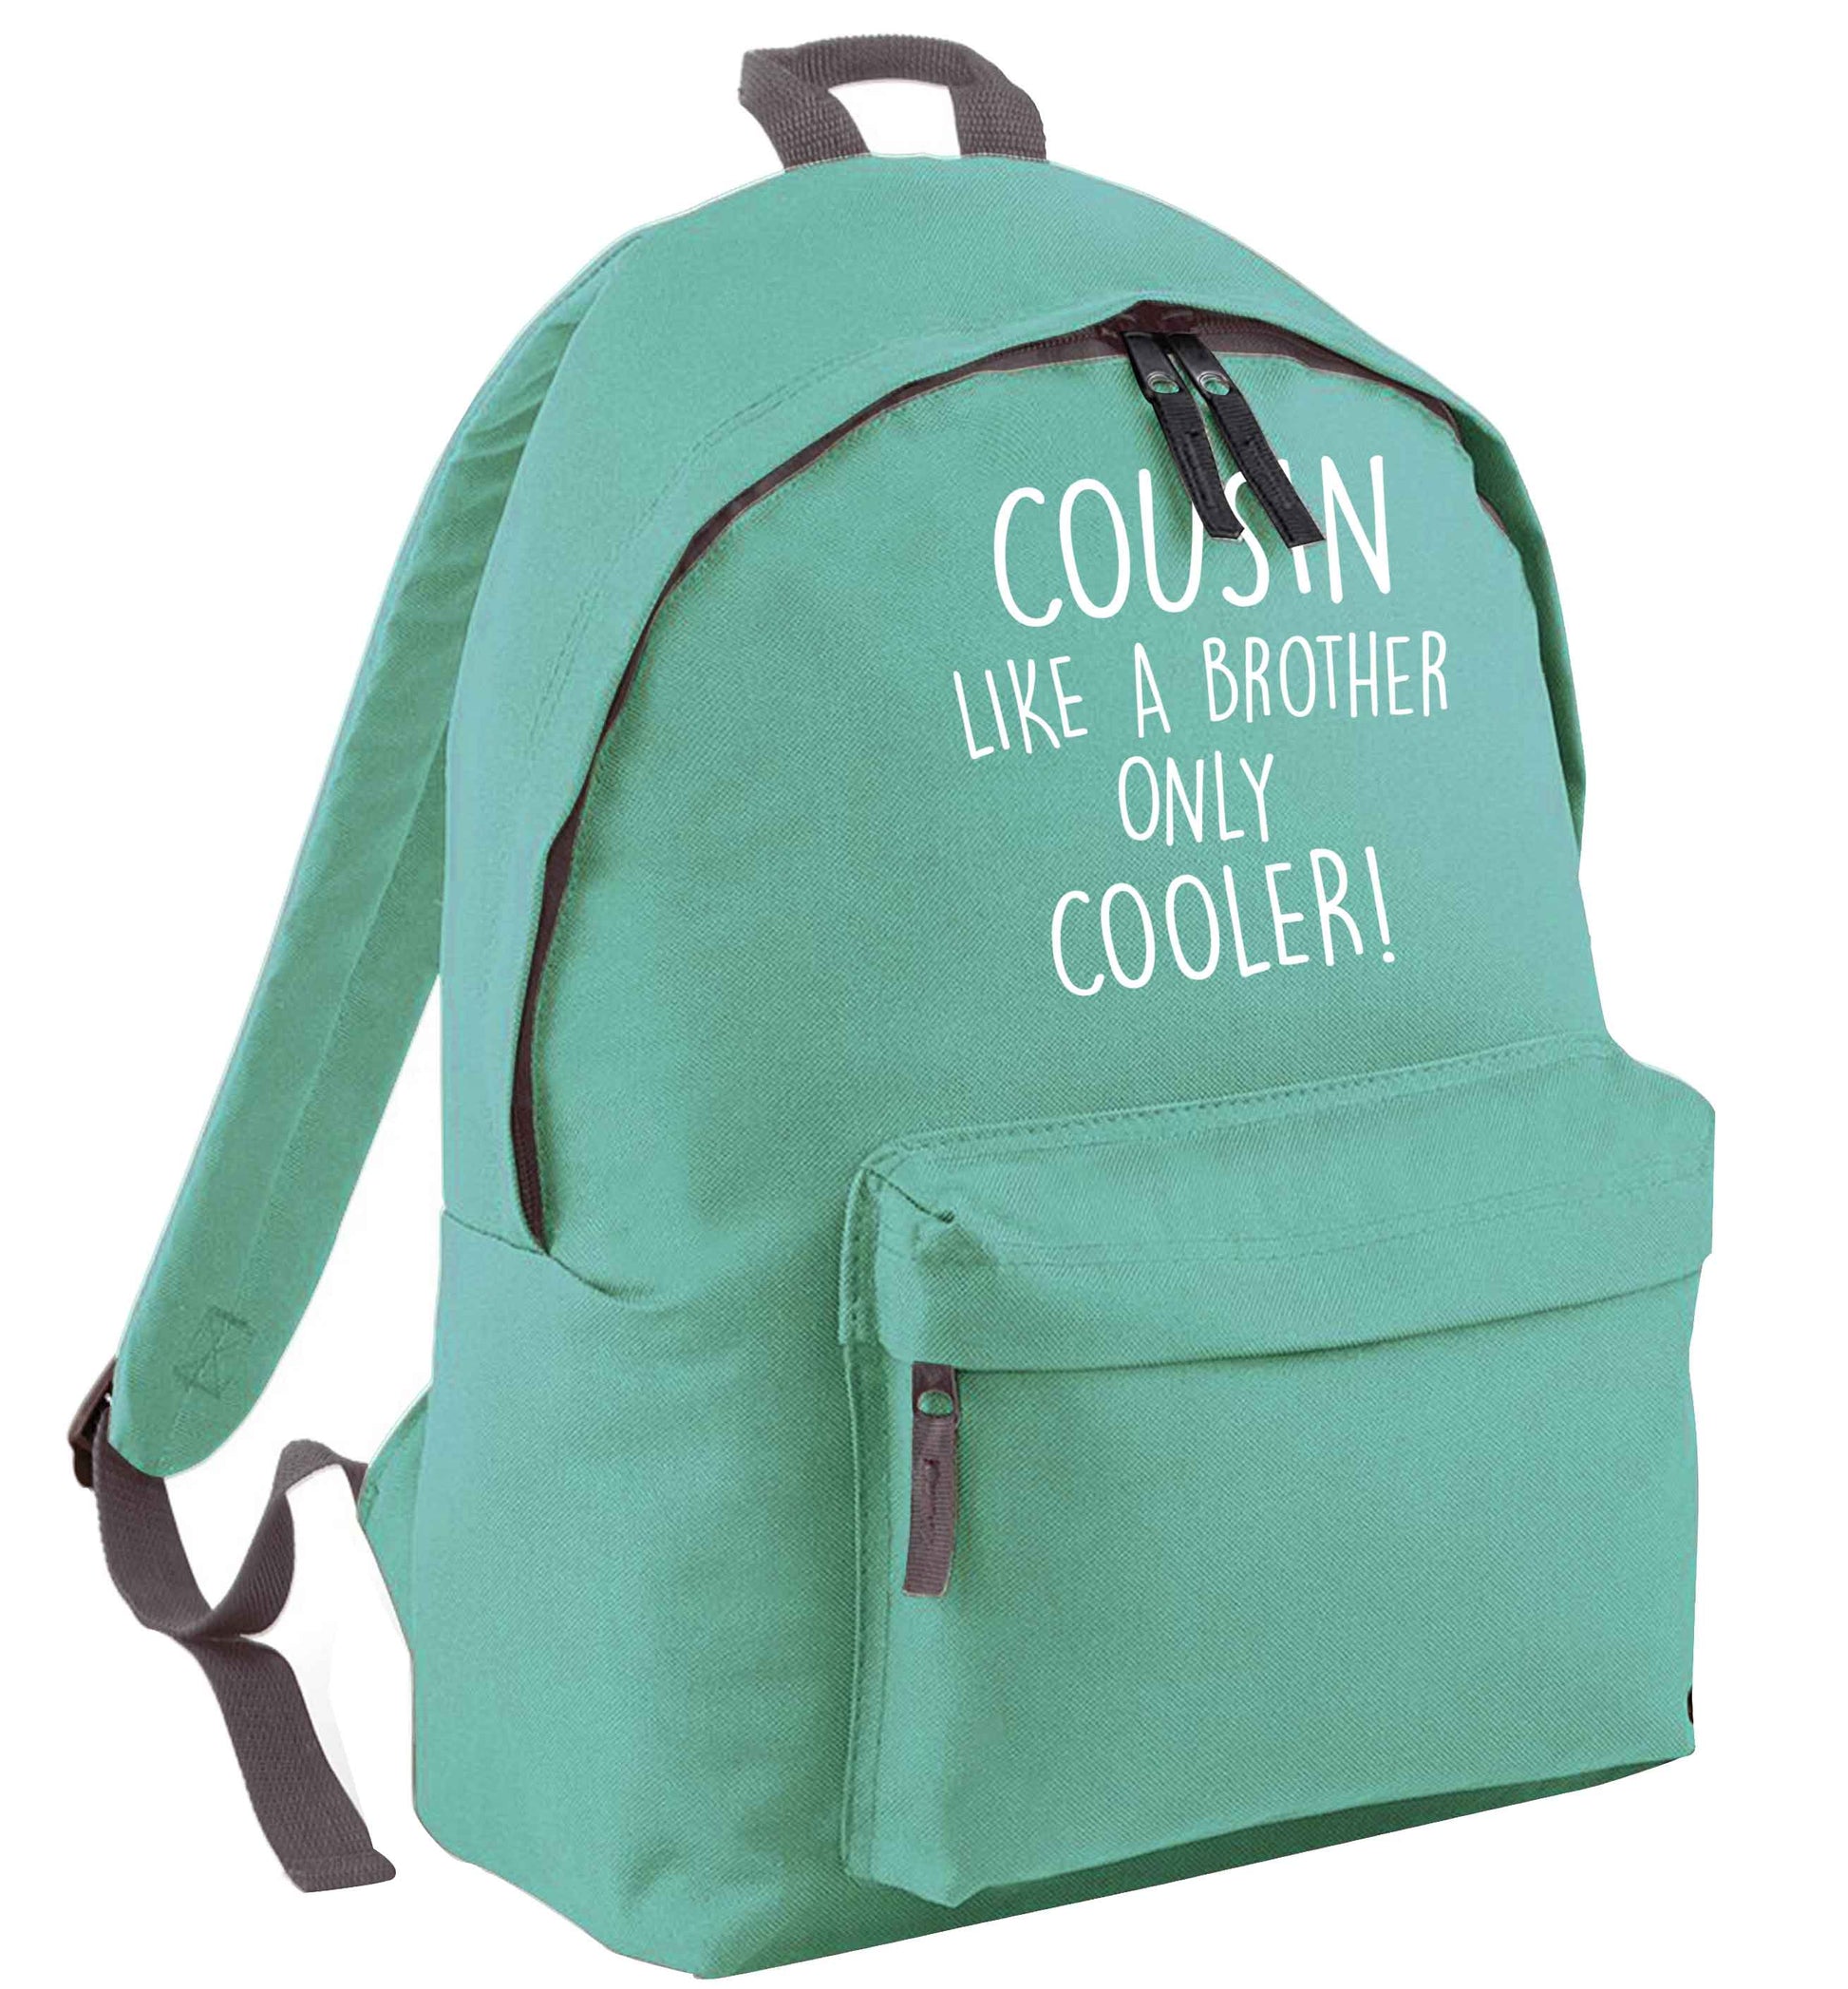 Cousin like a brother only cooler mint adults backpack